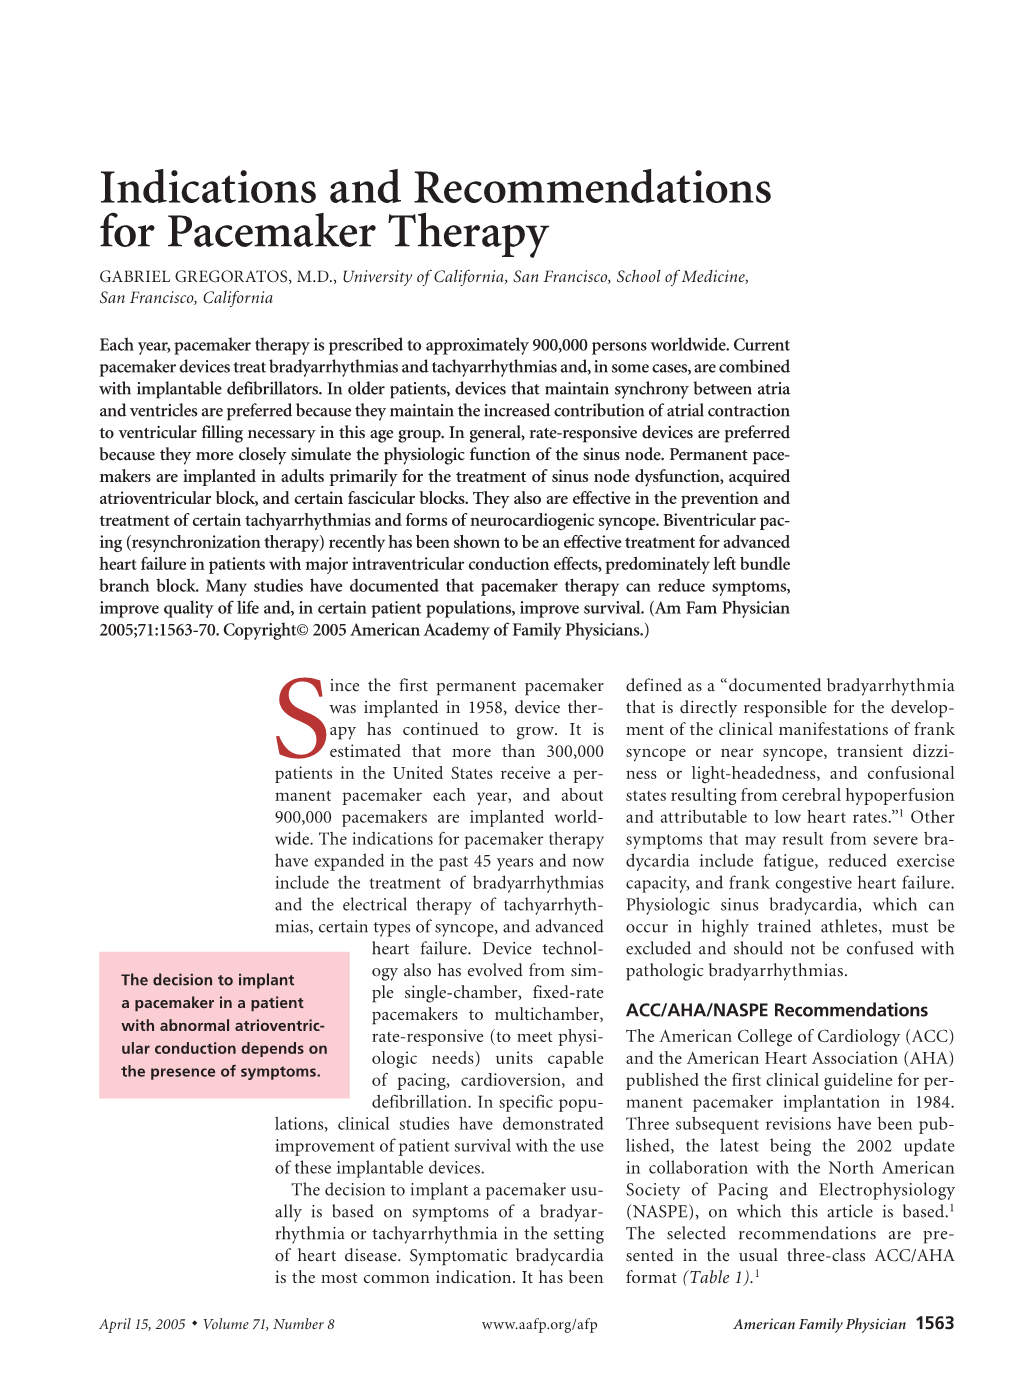 Indications and Recommendations for Pacemaker Therapy GABRIEL GREGORATOS, M.D., University of California, San Francisco, School of Medicine, San Francisco, California